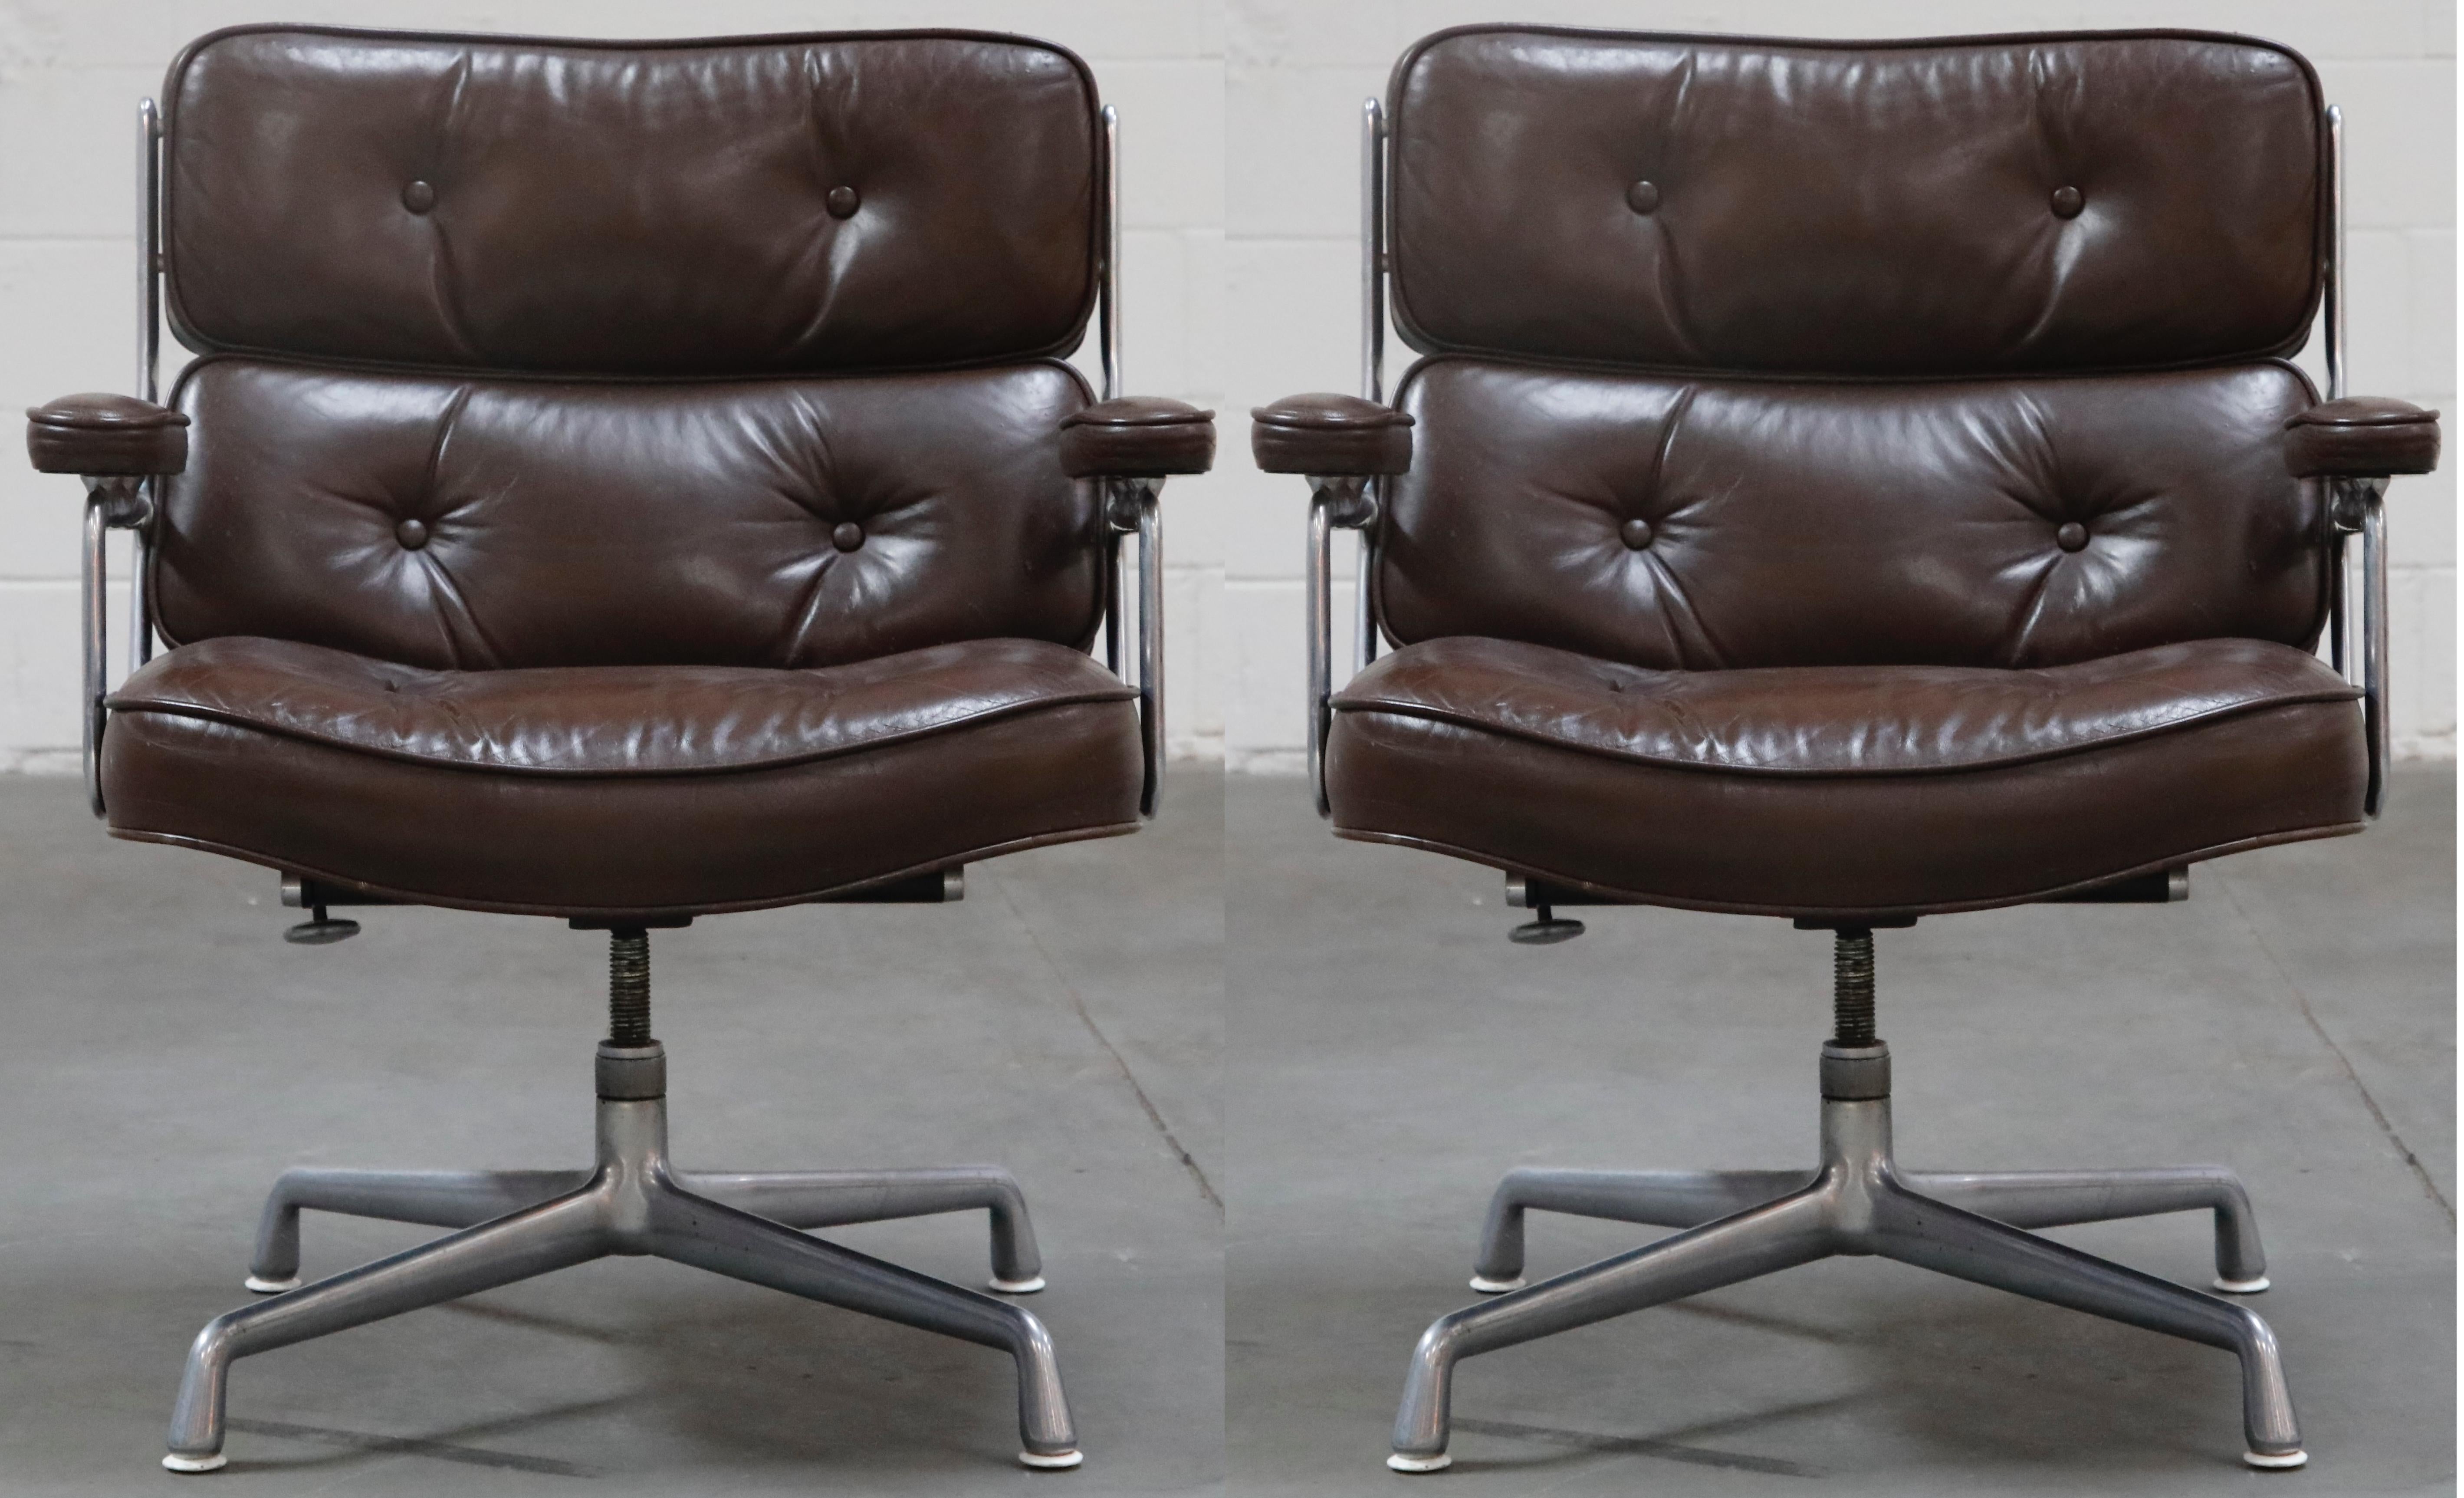 This wonderful pair of Time Life 'Lobby' lounge swivel armchairs were designed by Charles Eames in 1959 and manufactured by Herman Miller, these examples produced in the 1970s. This handsome pair features its original deep chocolate brown colored